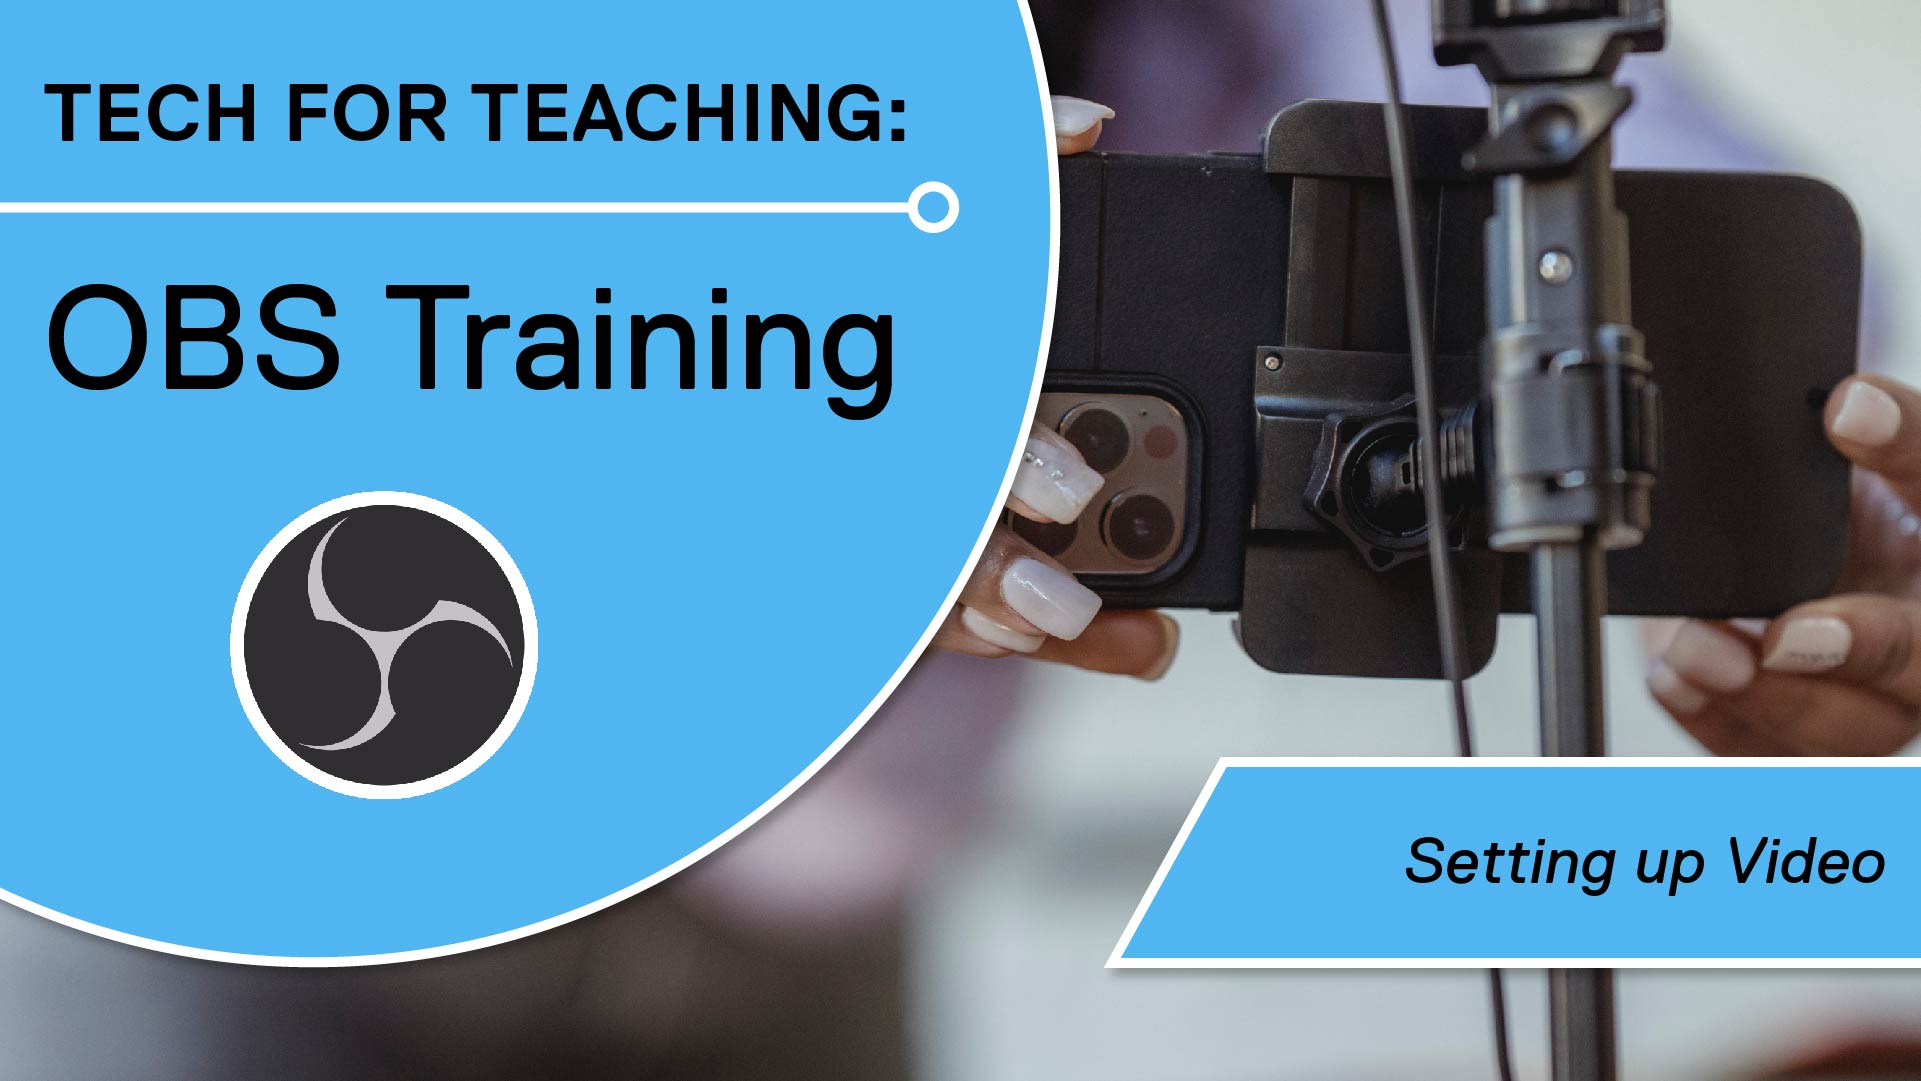 Tech for Teaching: OBS Training - Setting up Video